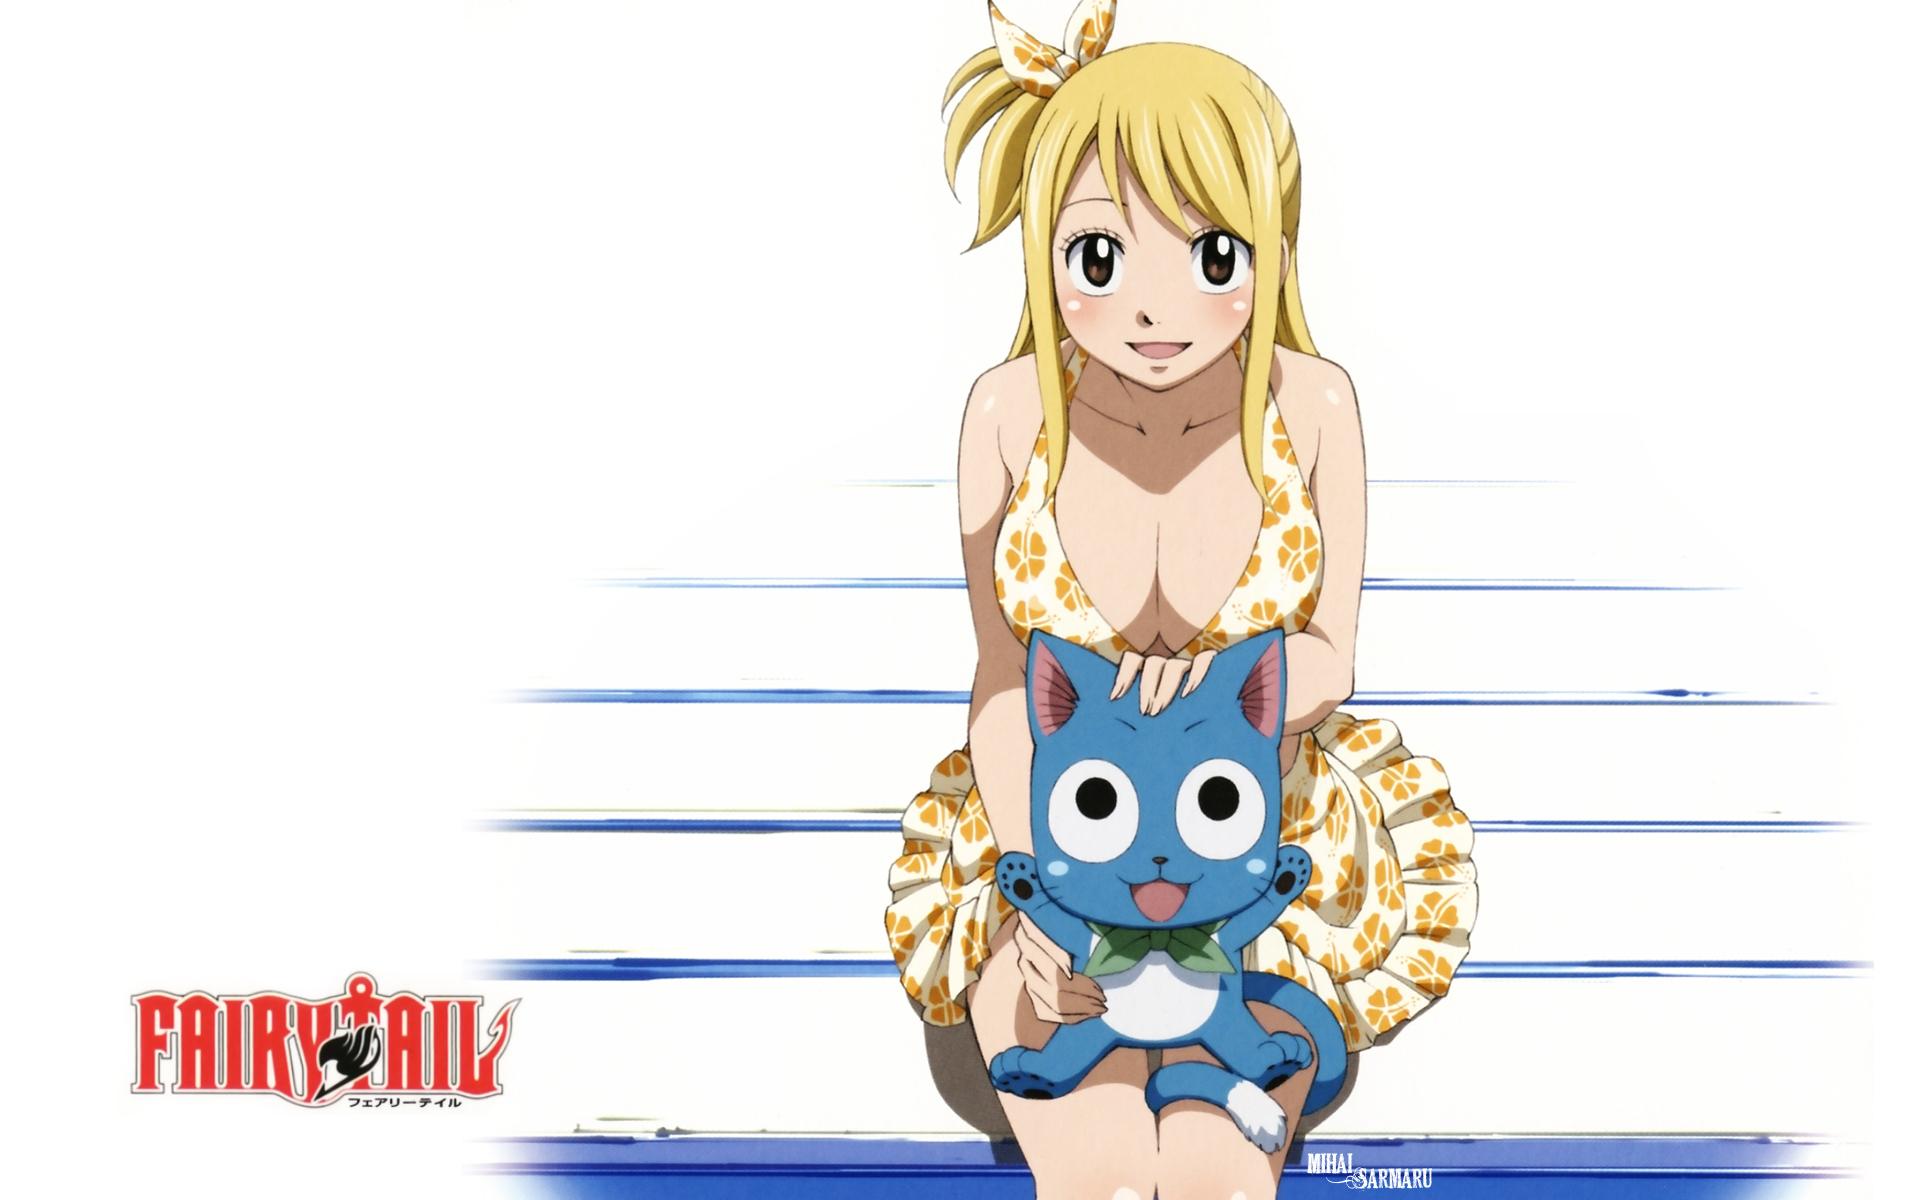 1500 Anime Fairy Tail HD Wallpapers and Backgrounds